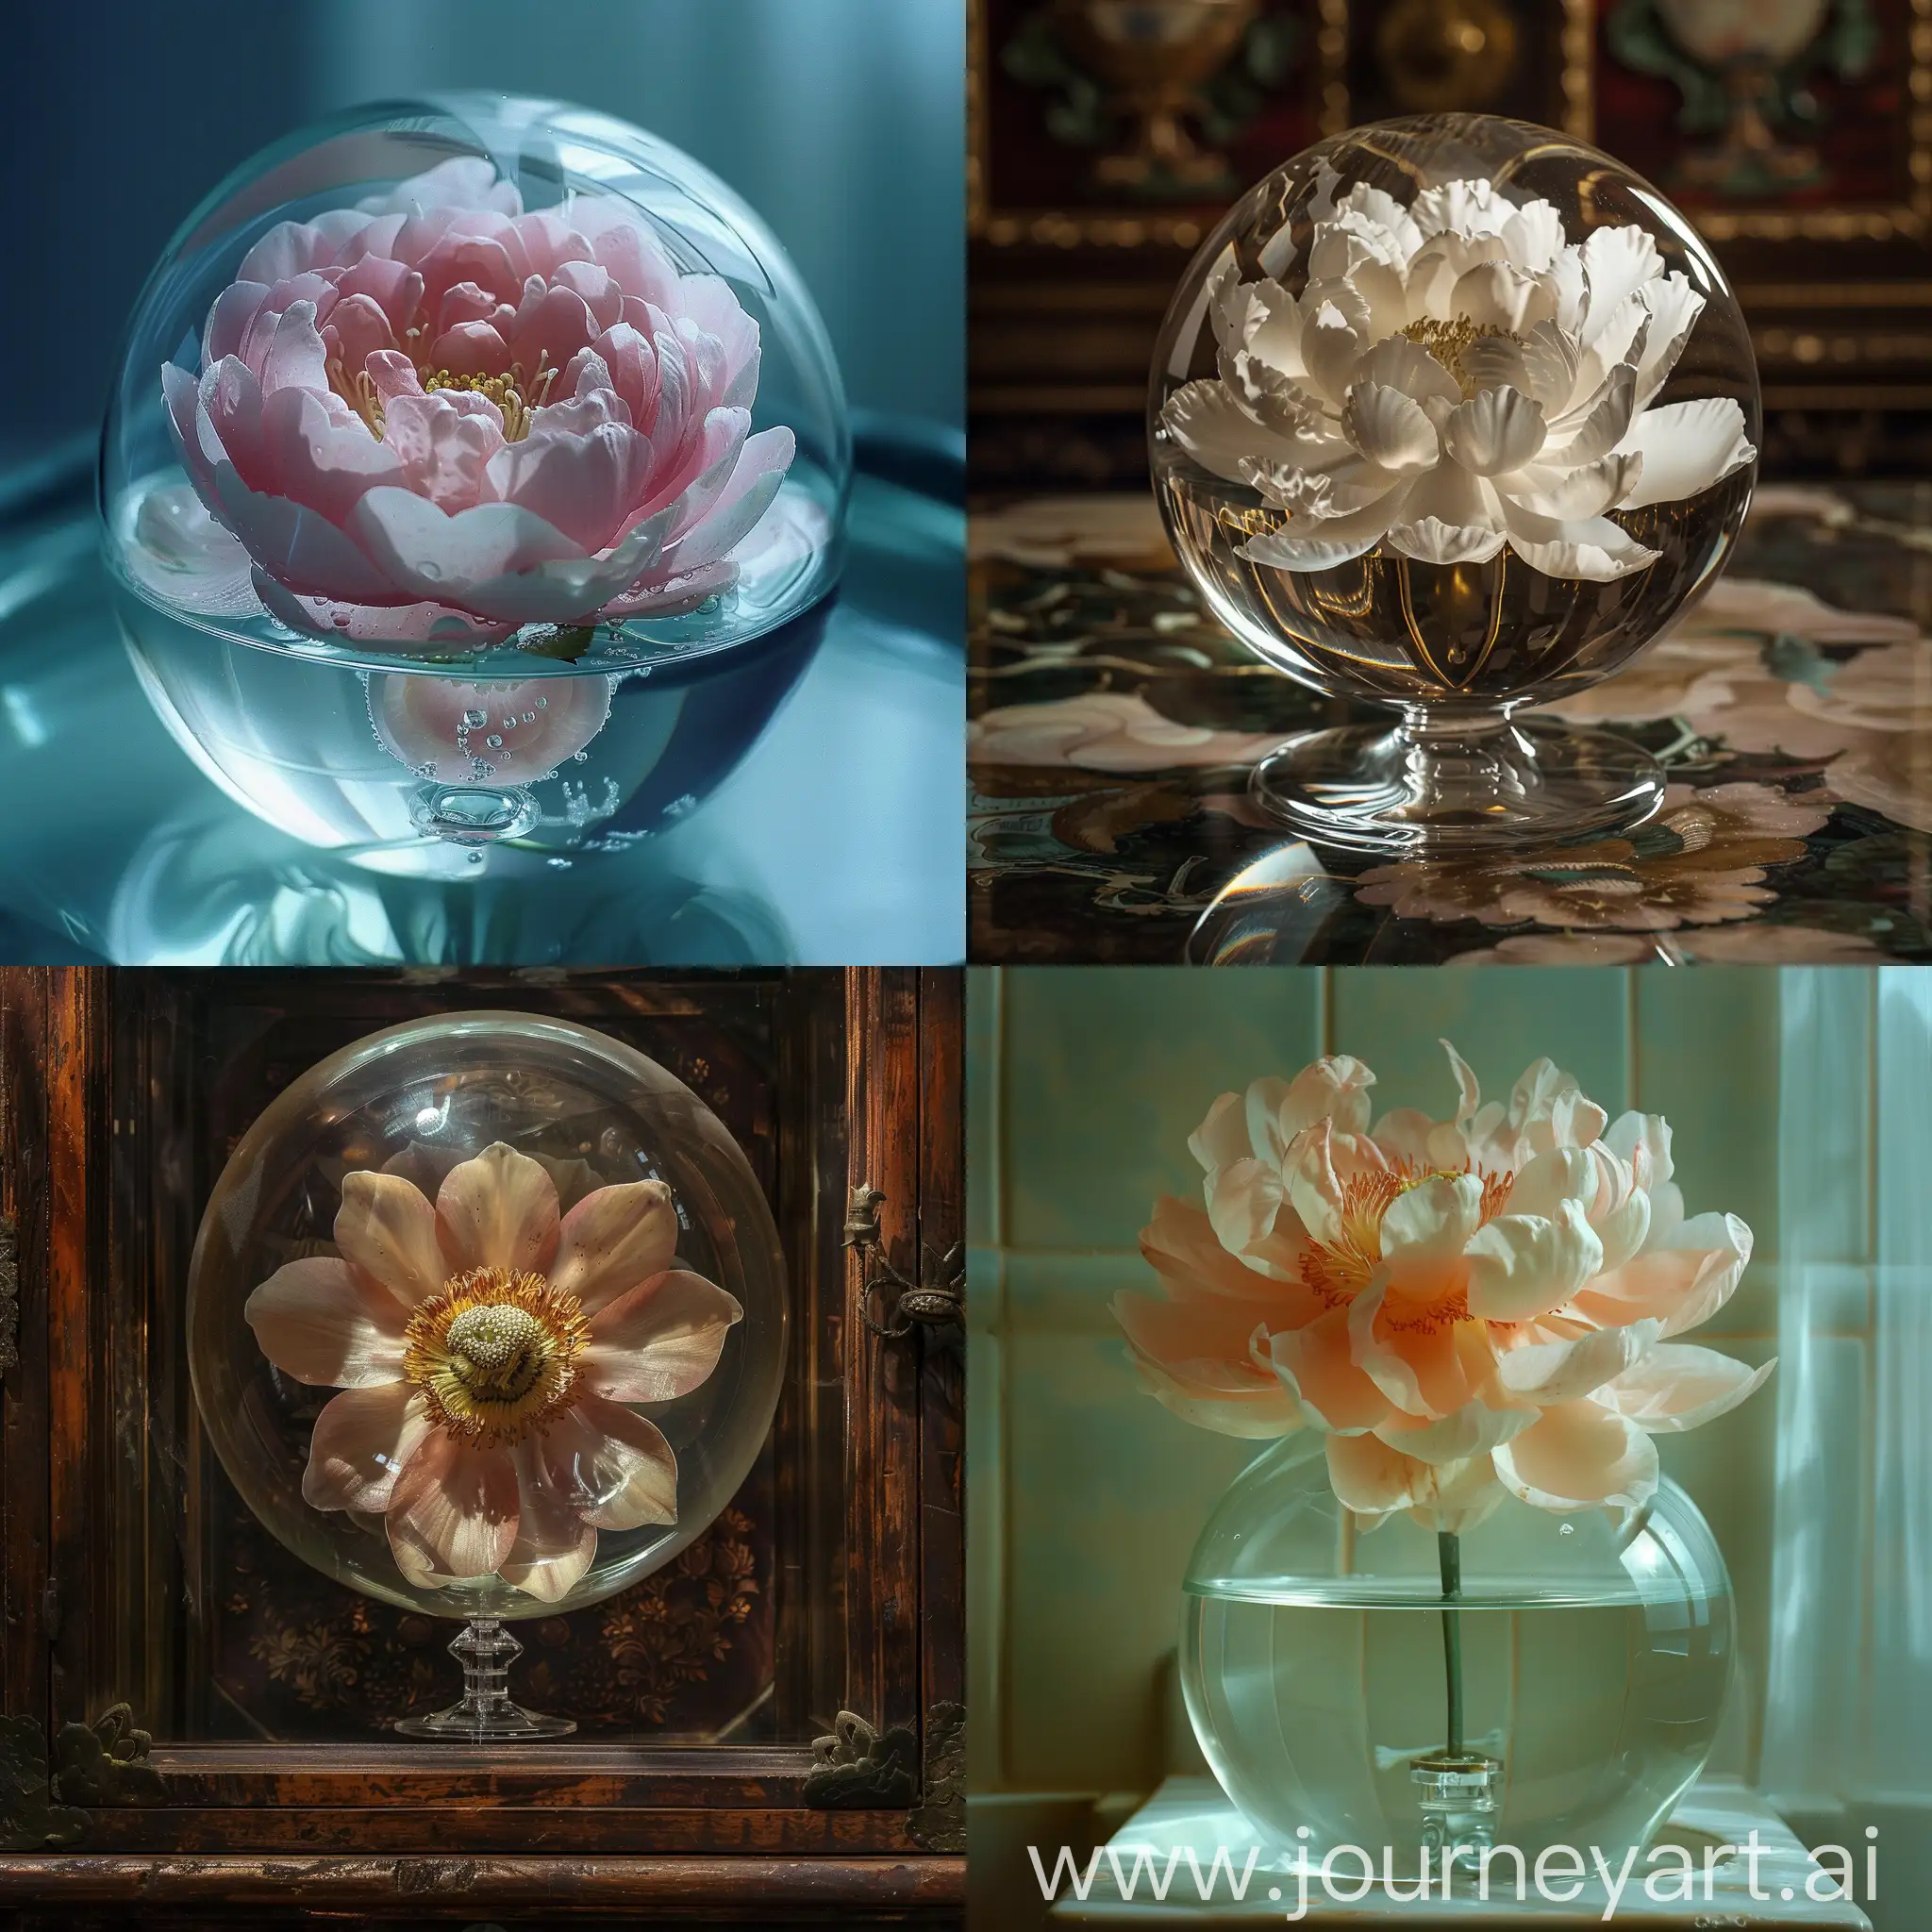 A real photo of a very beautiful flower inside a glass case with a spherical glass head, a masterpiece, beautiful, eye-catching, cinematic photography photo, in a very beautiful royal house, royal, royal, serious royal mood, flower The drain is glass